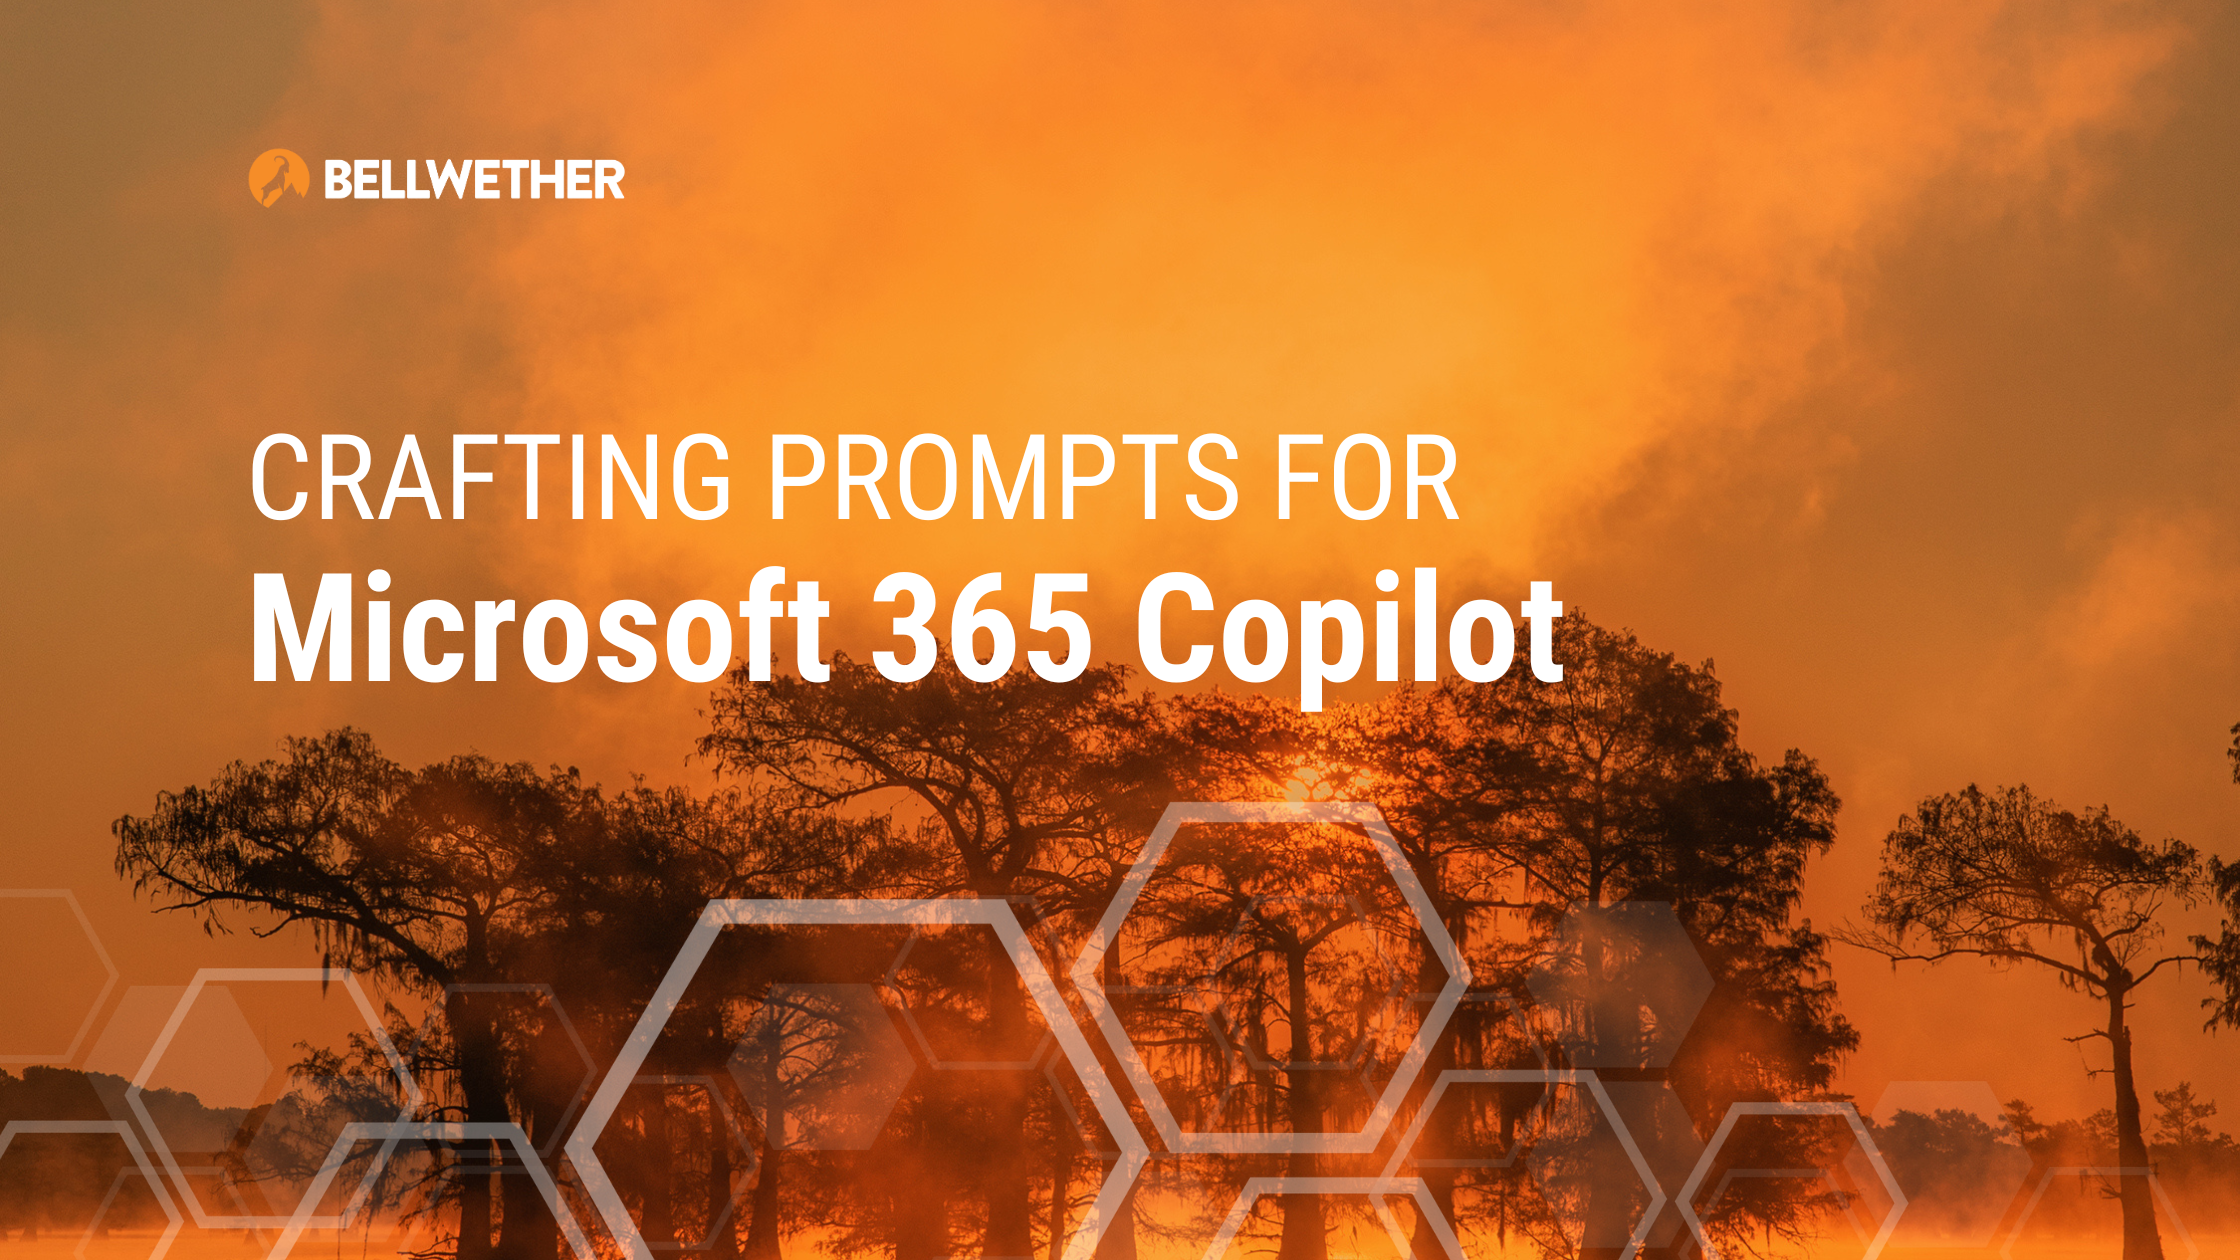 Crafting Prompts for Microsoft 365 Copilot